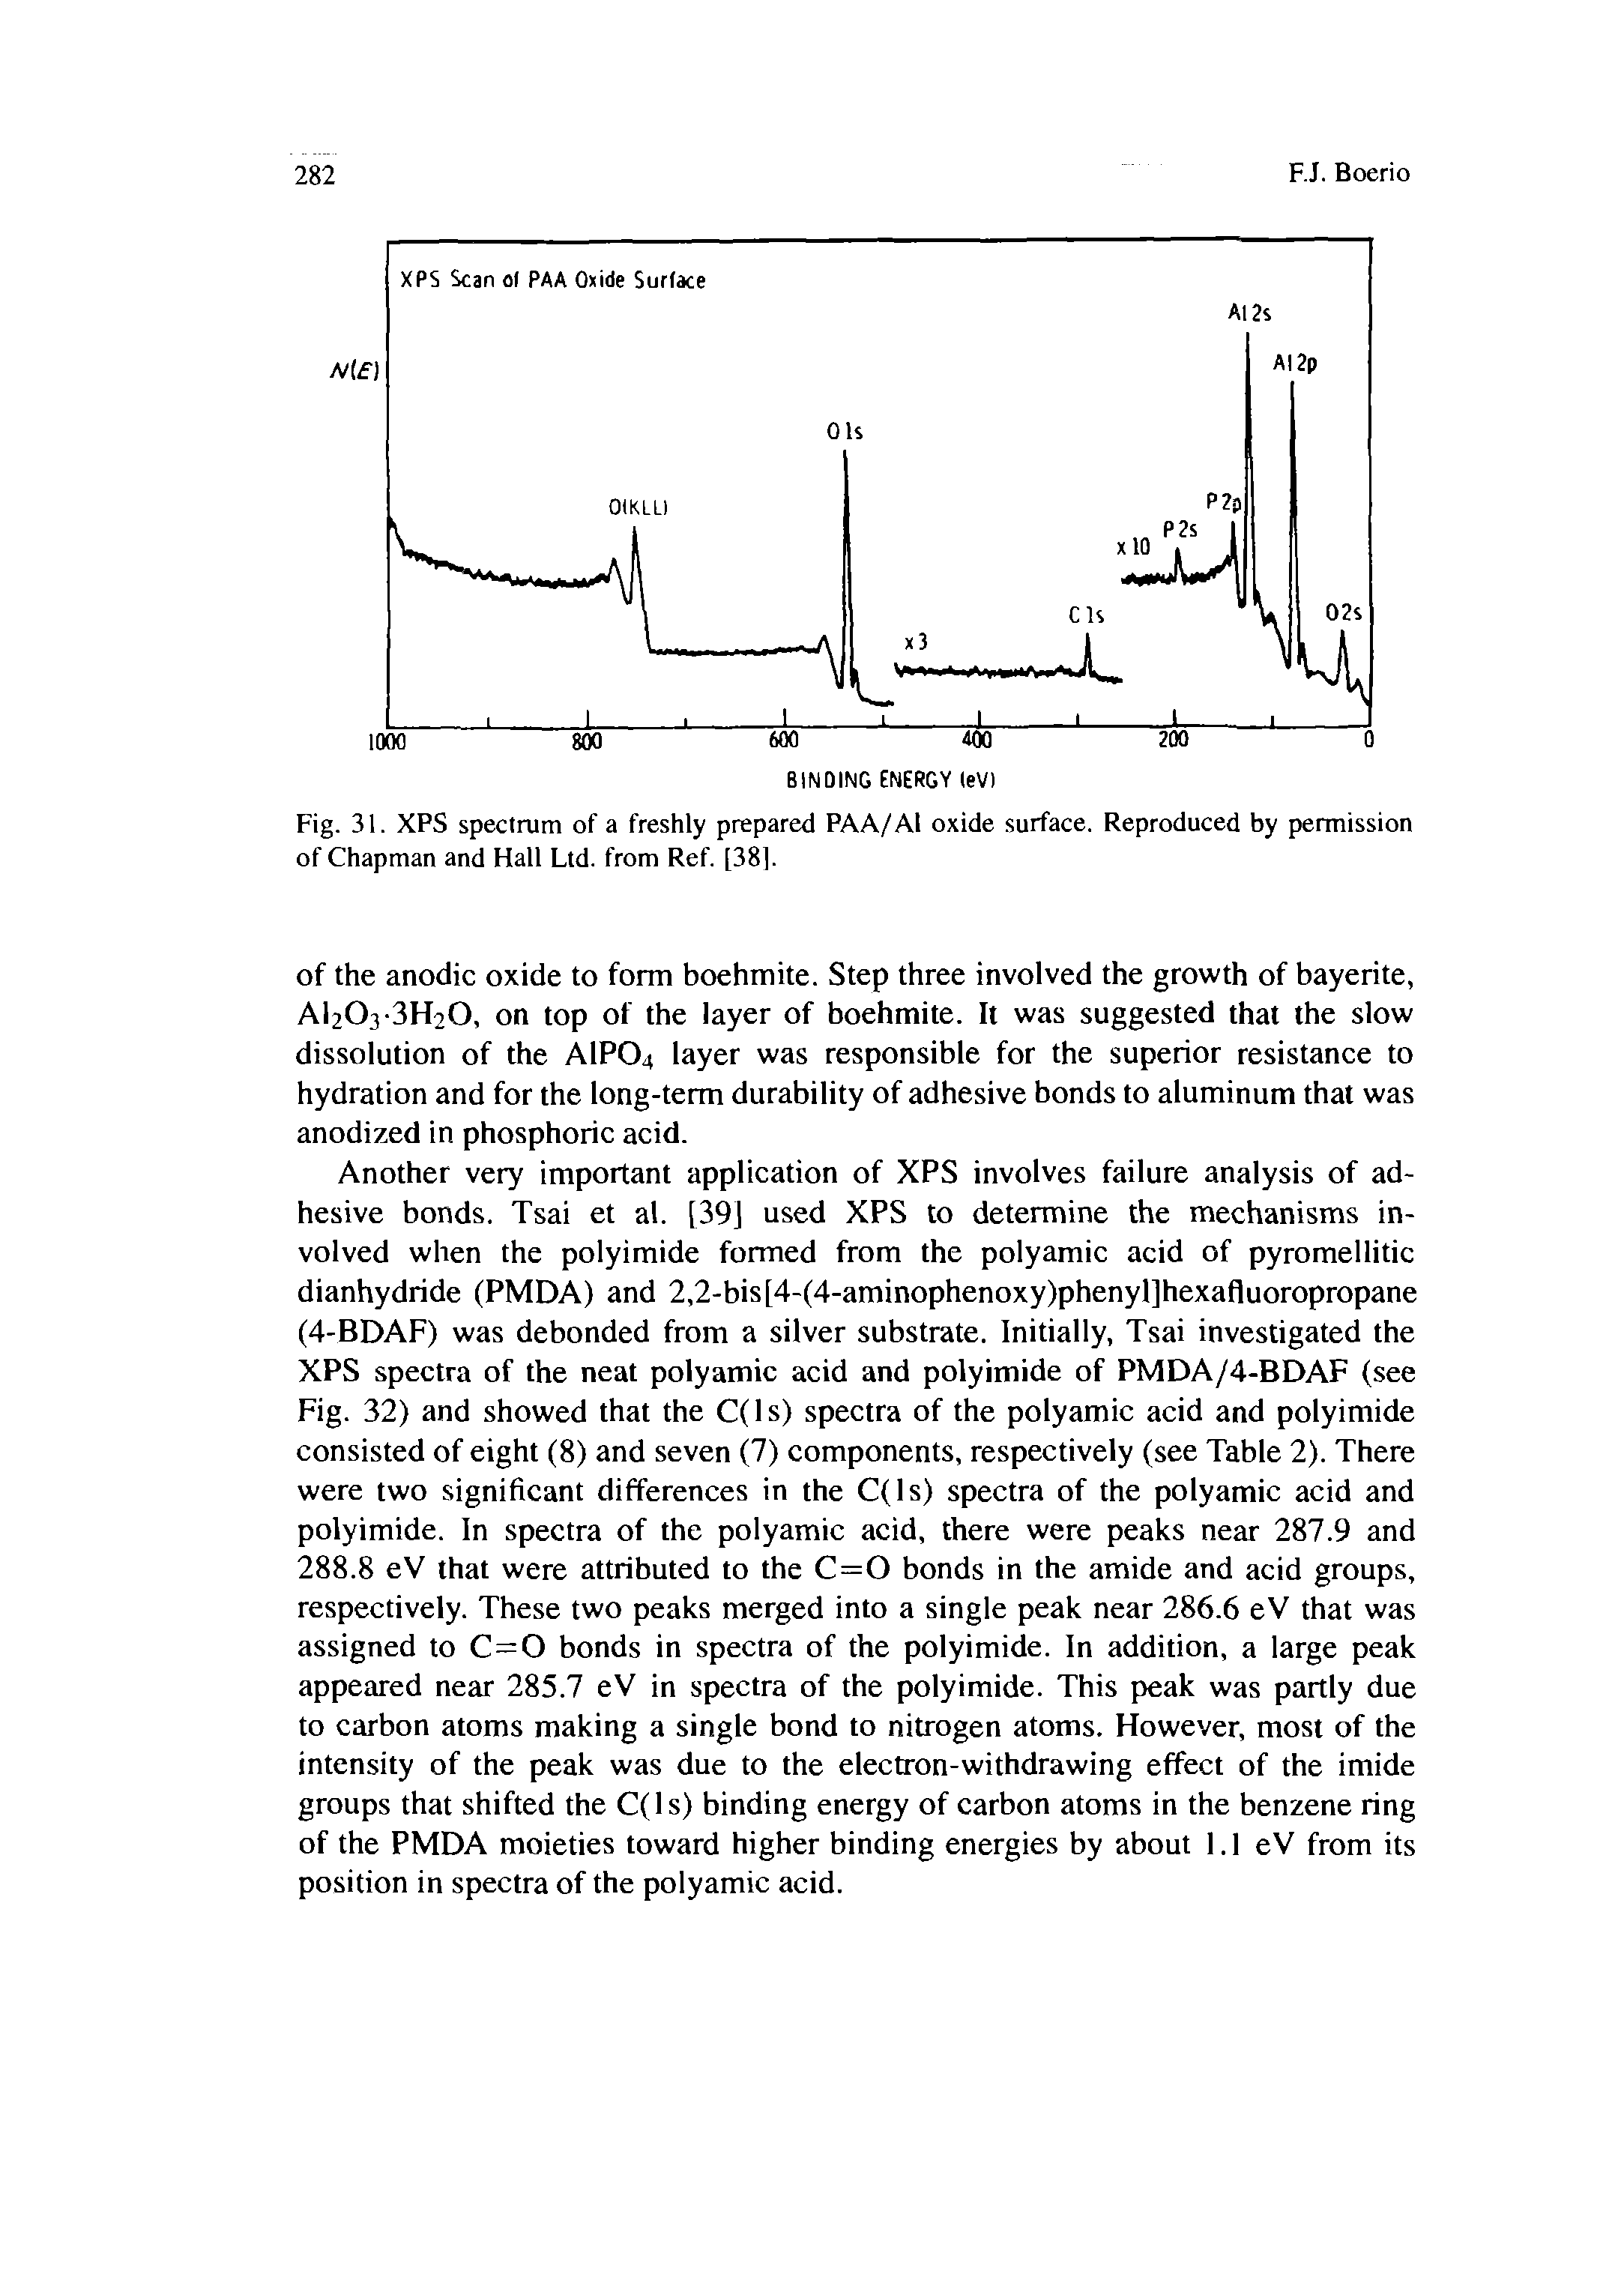 Fig. 31. XPS spectrum of a freshly prepared PAA/Al oxide surface. Reproduced by permission of Chapman and Hall Ltd. from Ref. [38].